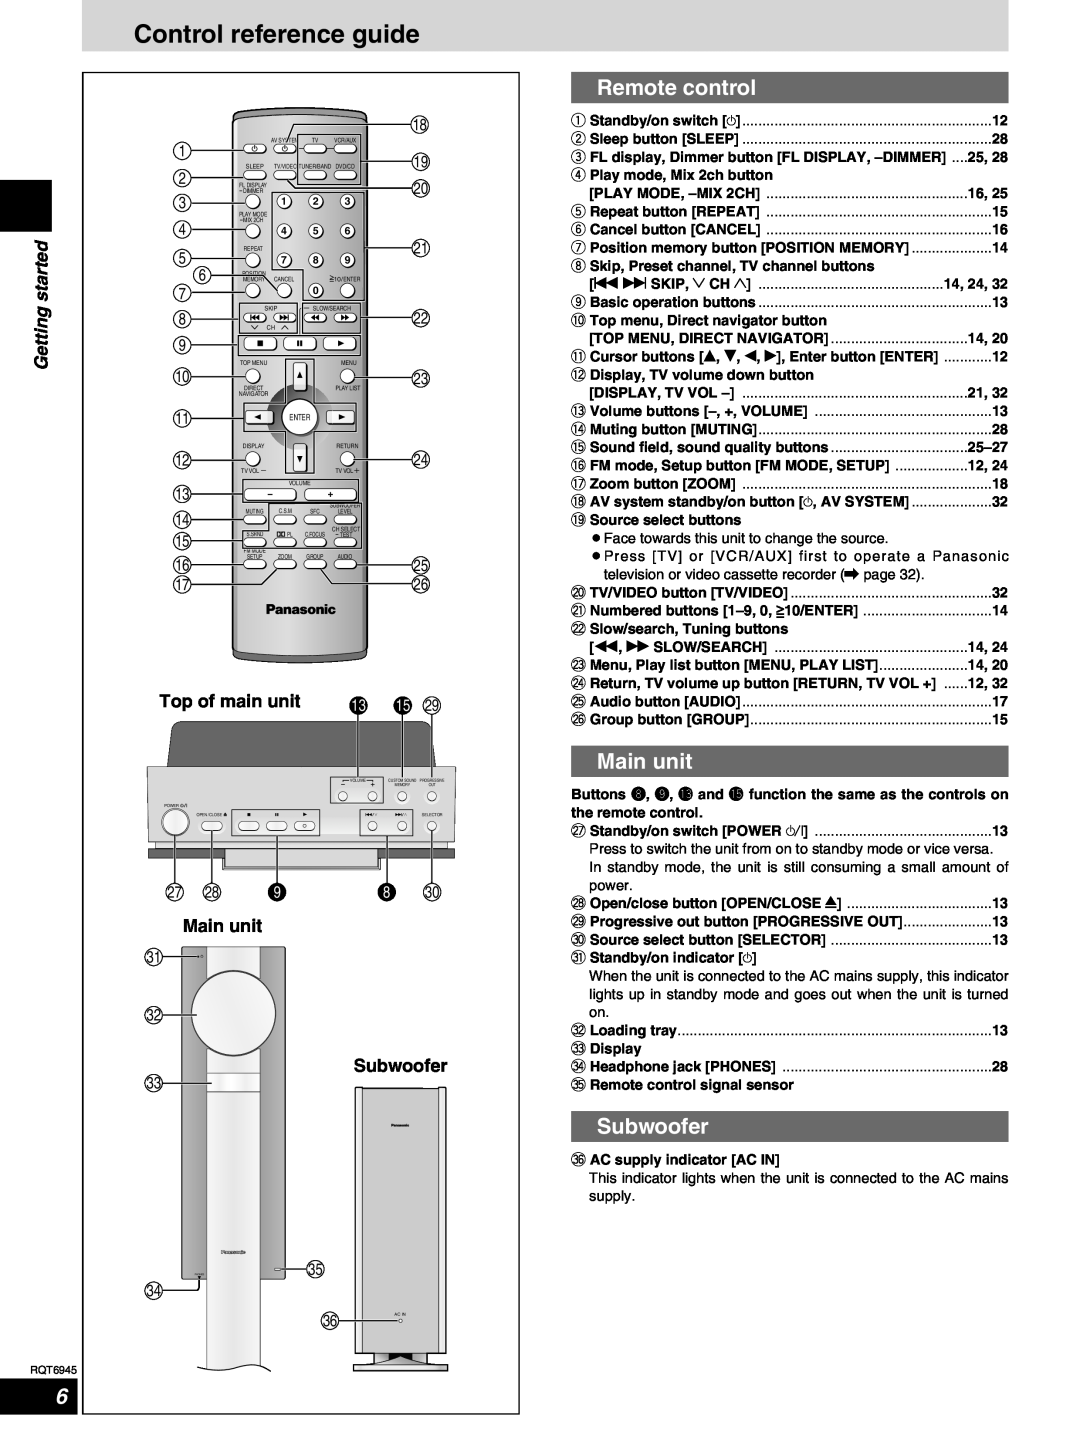 Panasonic SC-ST1 warranty Control reference guide, Remote control, Main unit, Subwoofer, Getting started, Top of main unit 